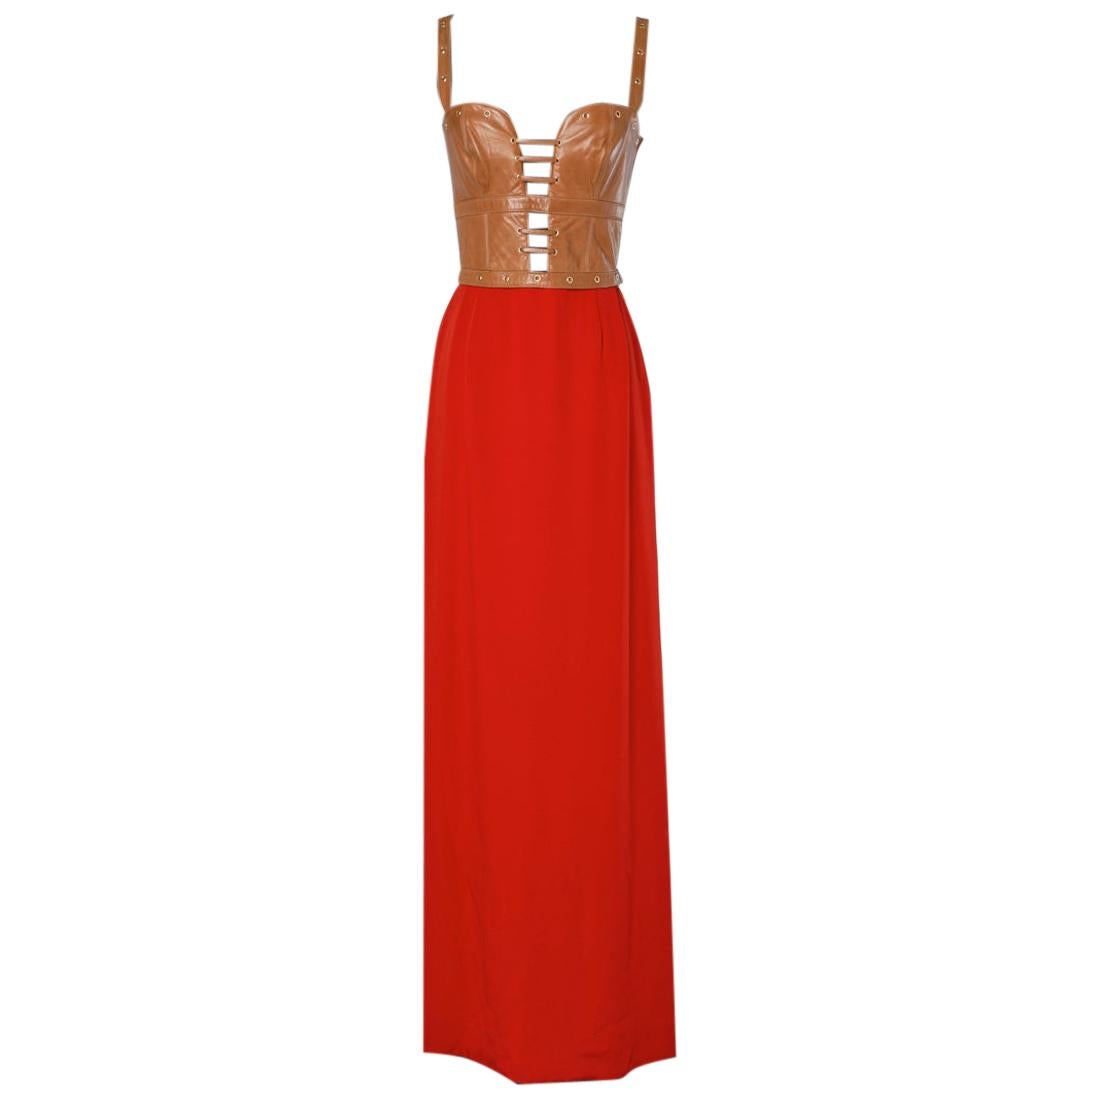 Long dress in corseted leather and red crepe with Genny label